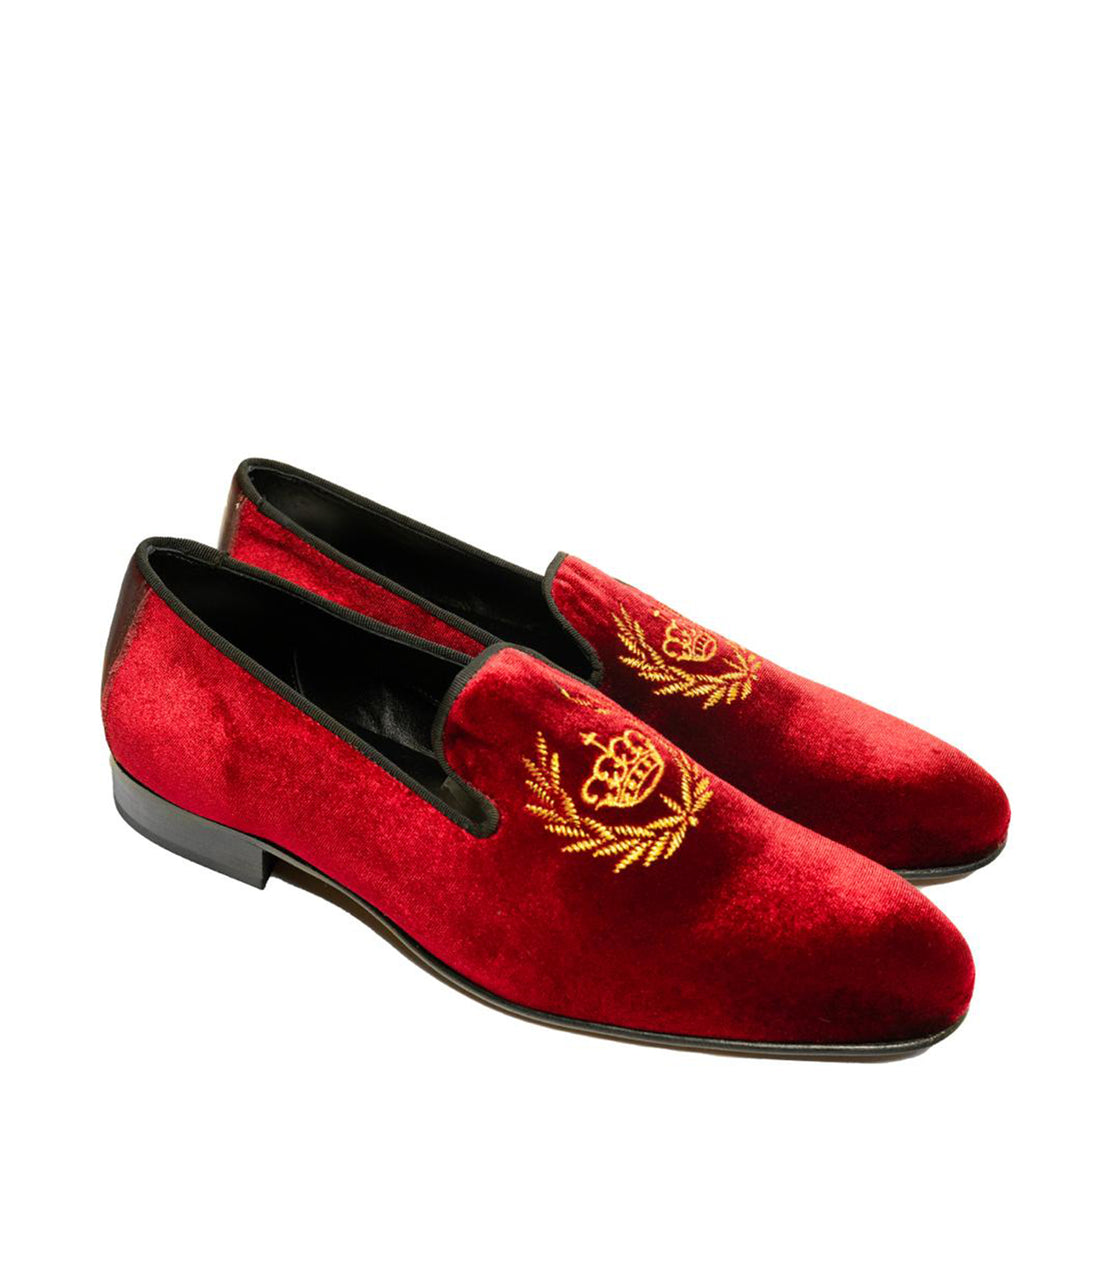 Andrea Nobile - Burgundy Suede Loafers with Crown Embroidery